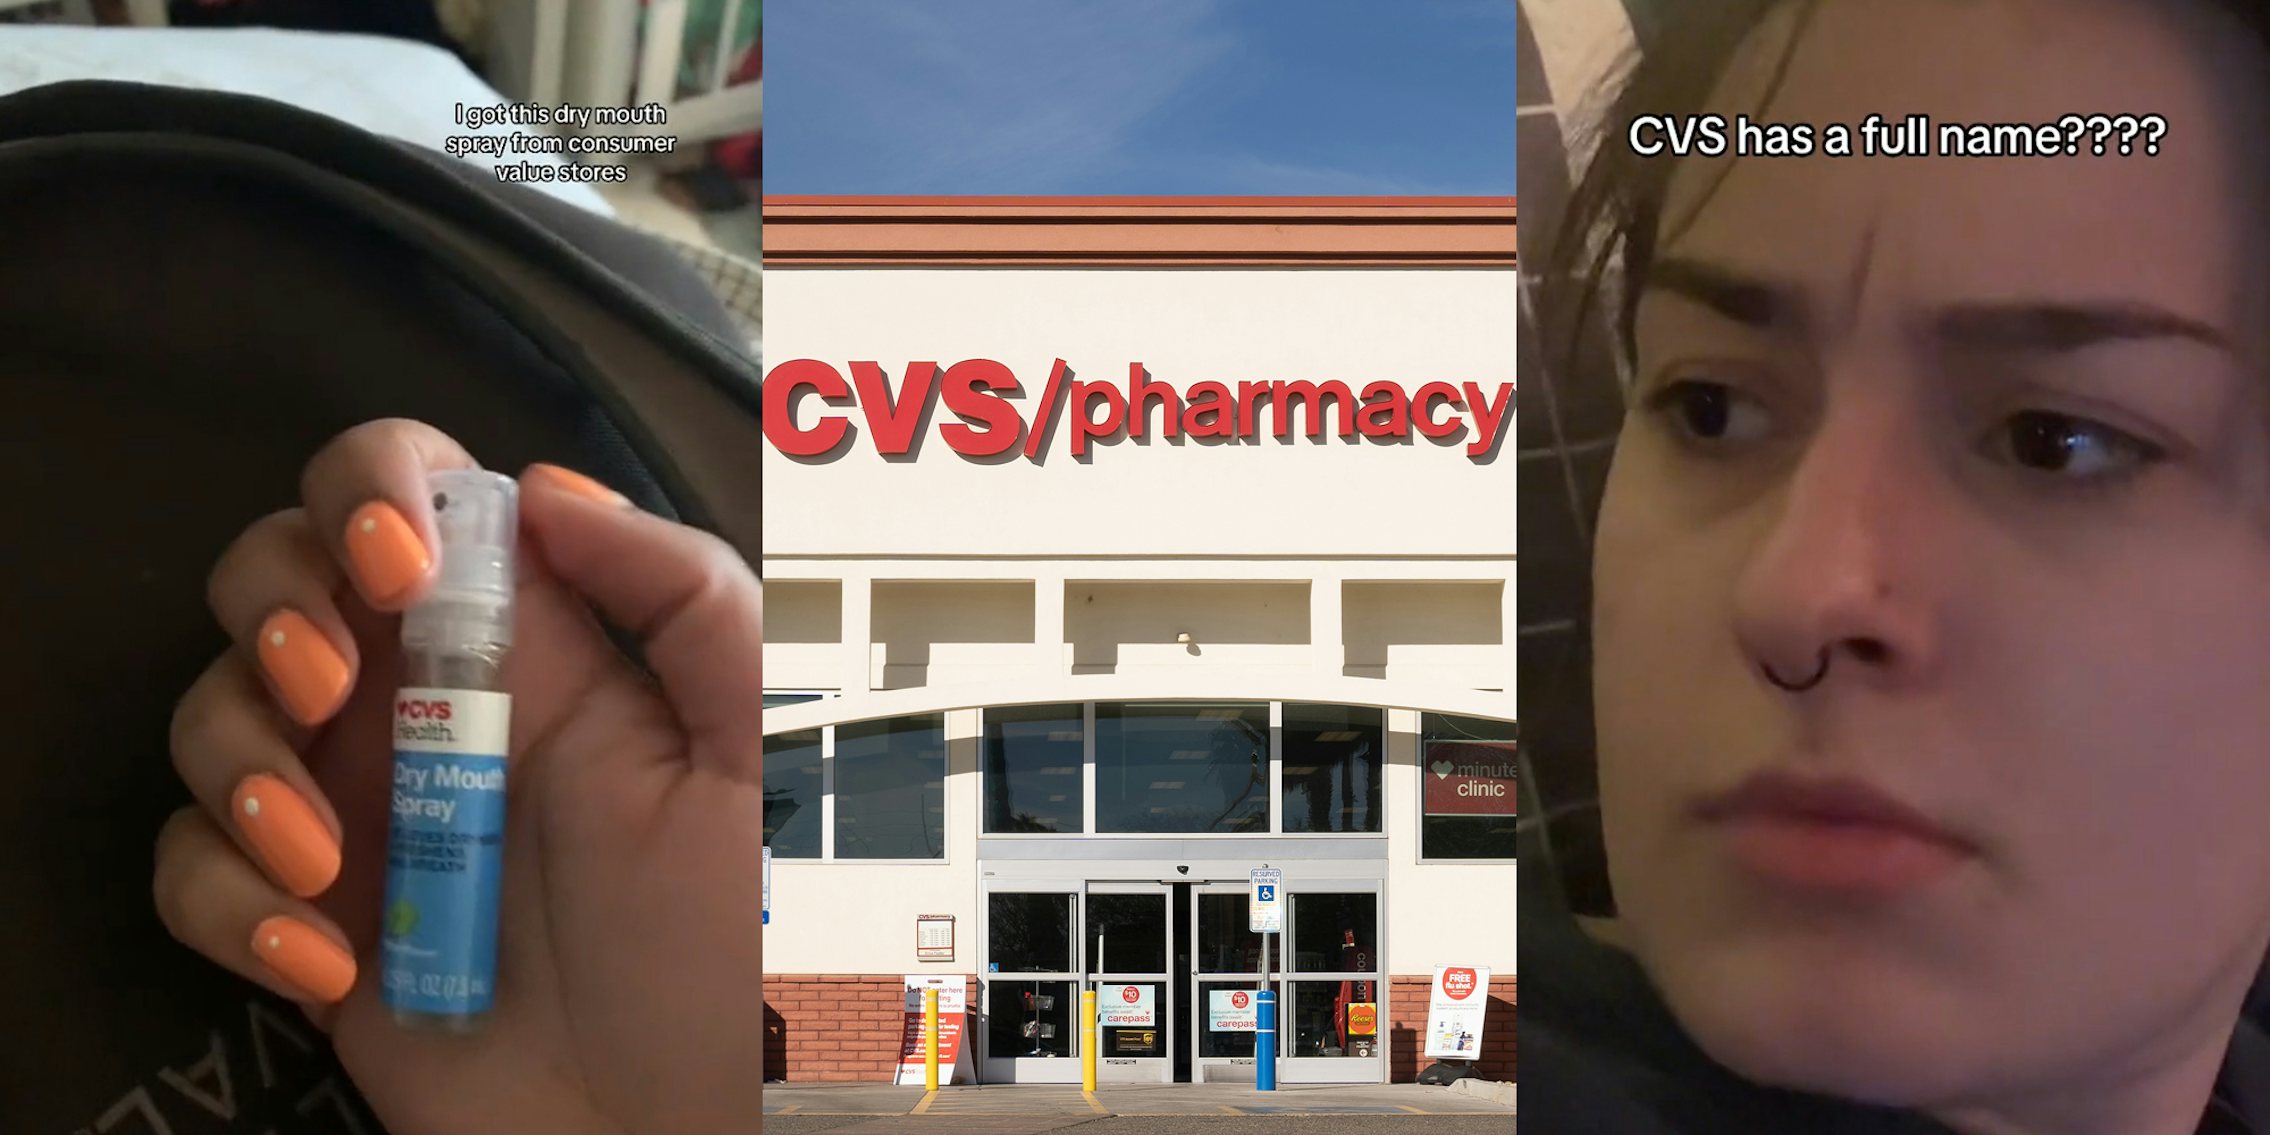 CVS customer holding dry mouth spray with caption 'I got this dry mouth spray from consumer value stores' (l) CVS building with sign (c) person with caption 'CVS has a full name????' (r)